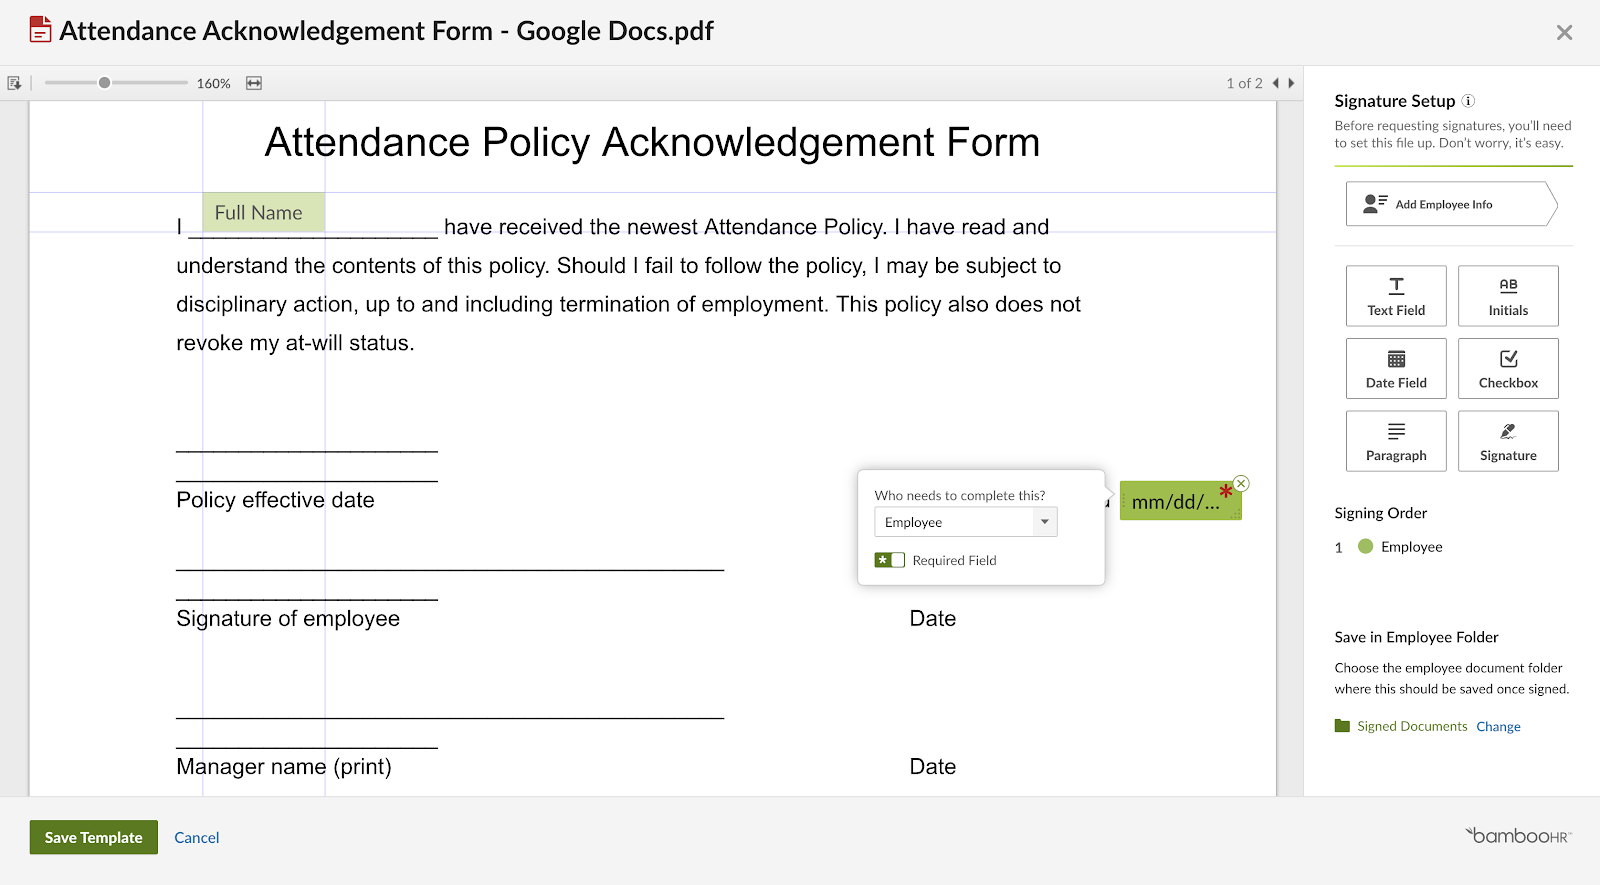 BambooHR displays a company’s policy acknowledgment with a toolbar to the right to add electronic elements like text fields, initials, checkboxes, and signatures to the document.